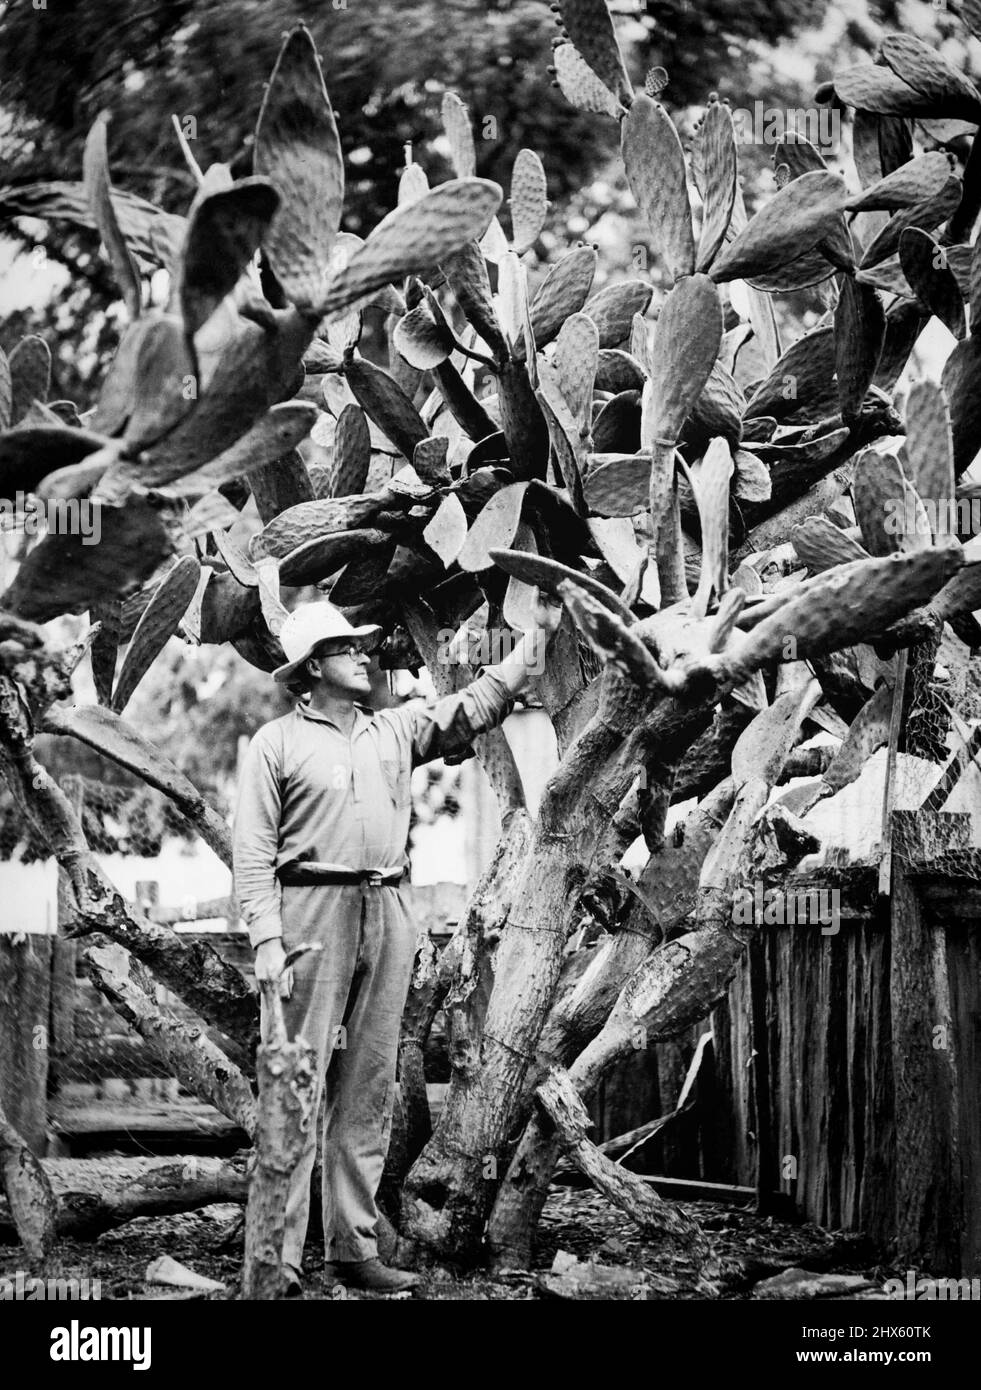 One of several Giant Cactus over 12 feet high growing on Mr. Tyes property near Riverstone. November 11, 1935. Stock Photo